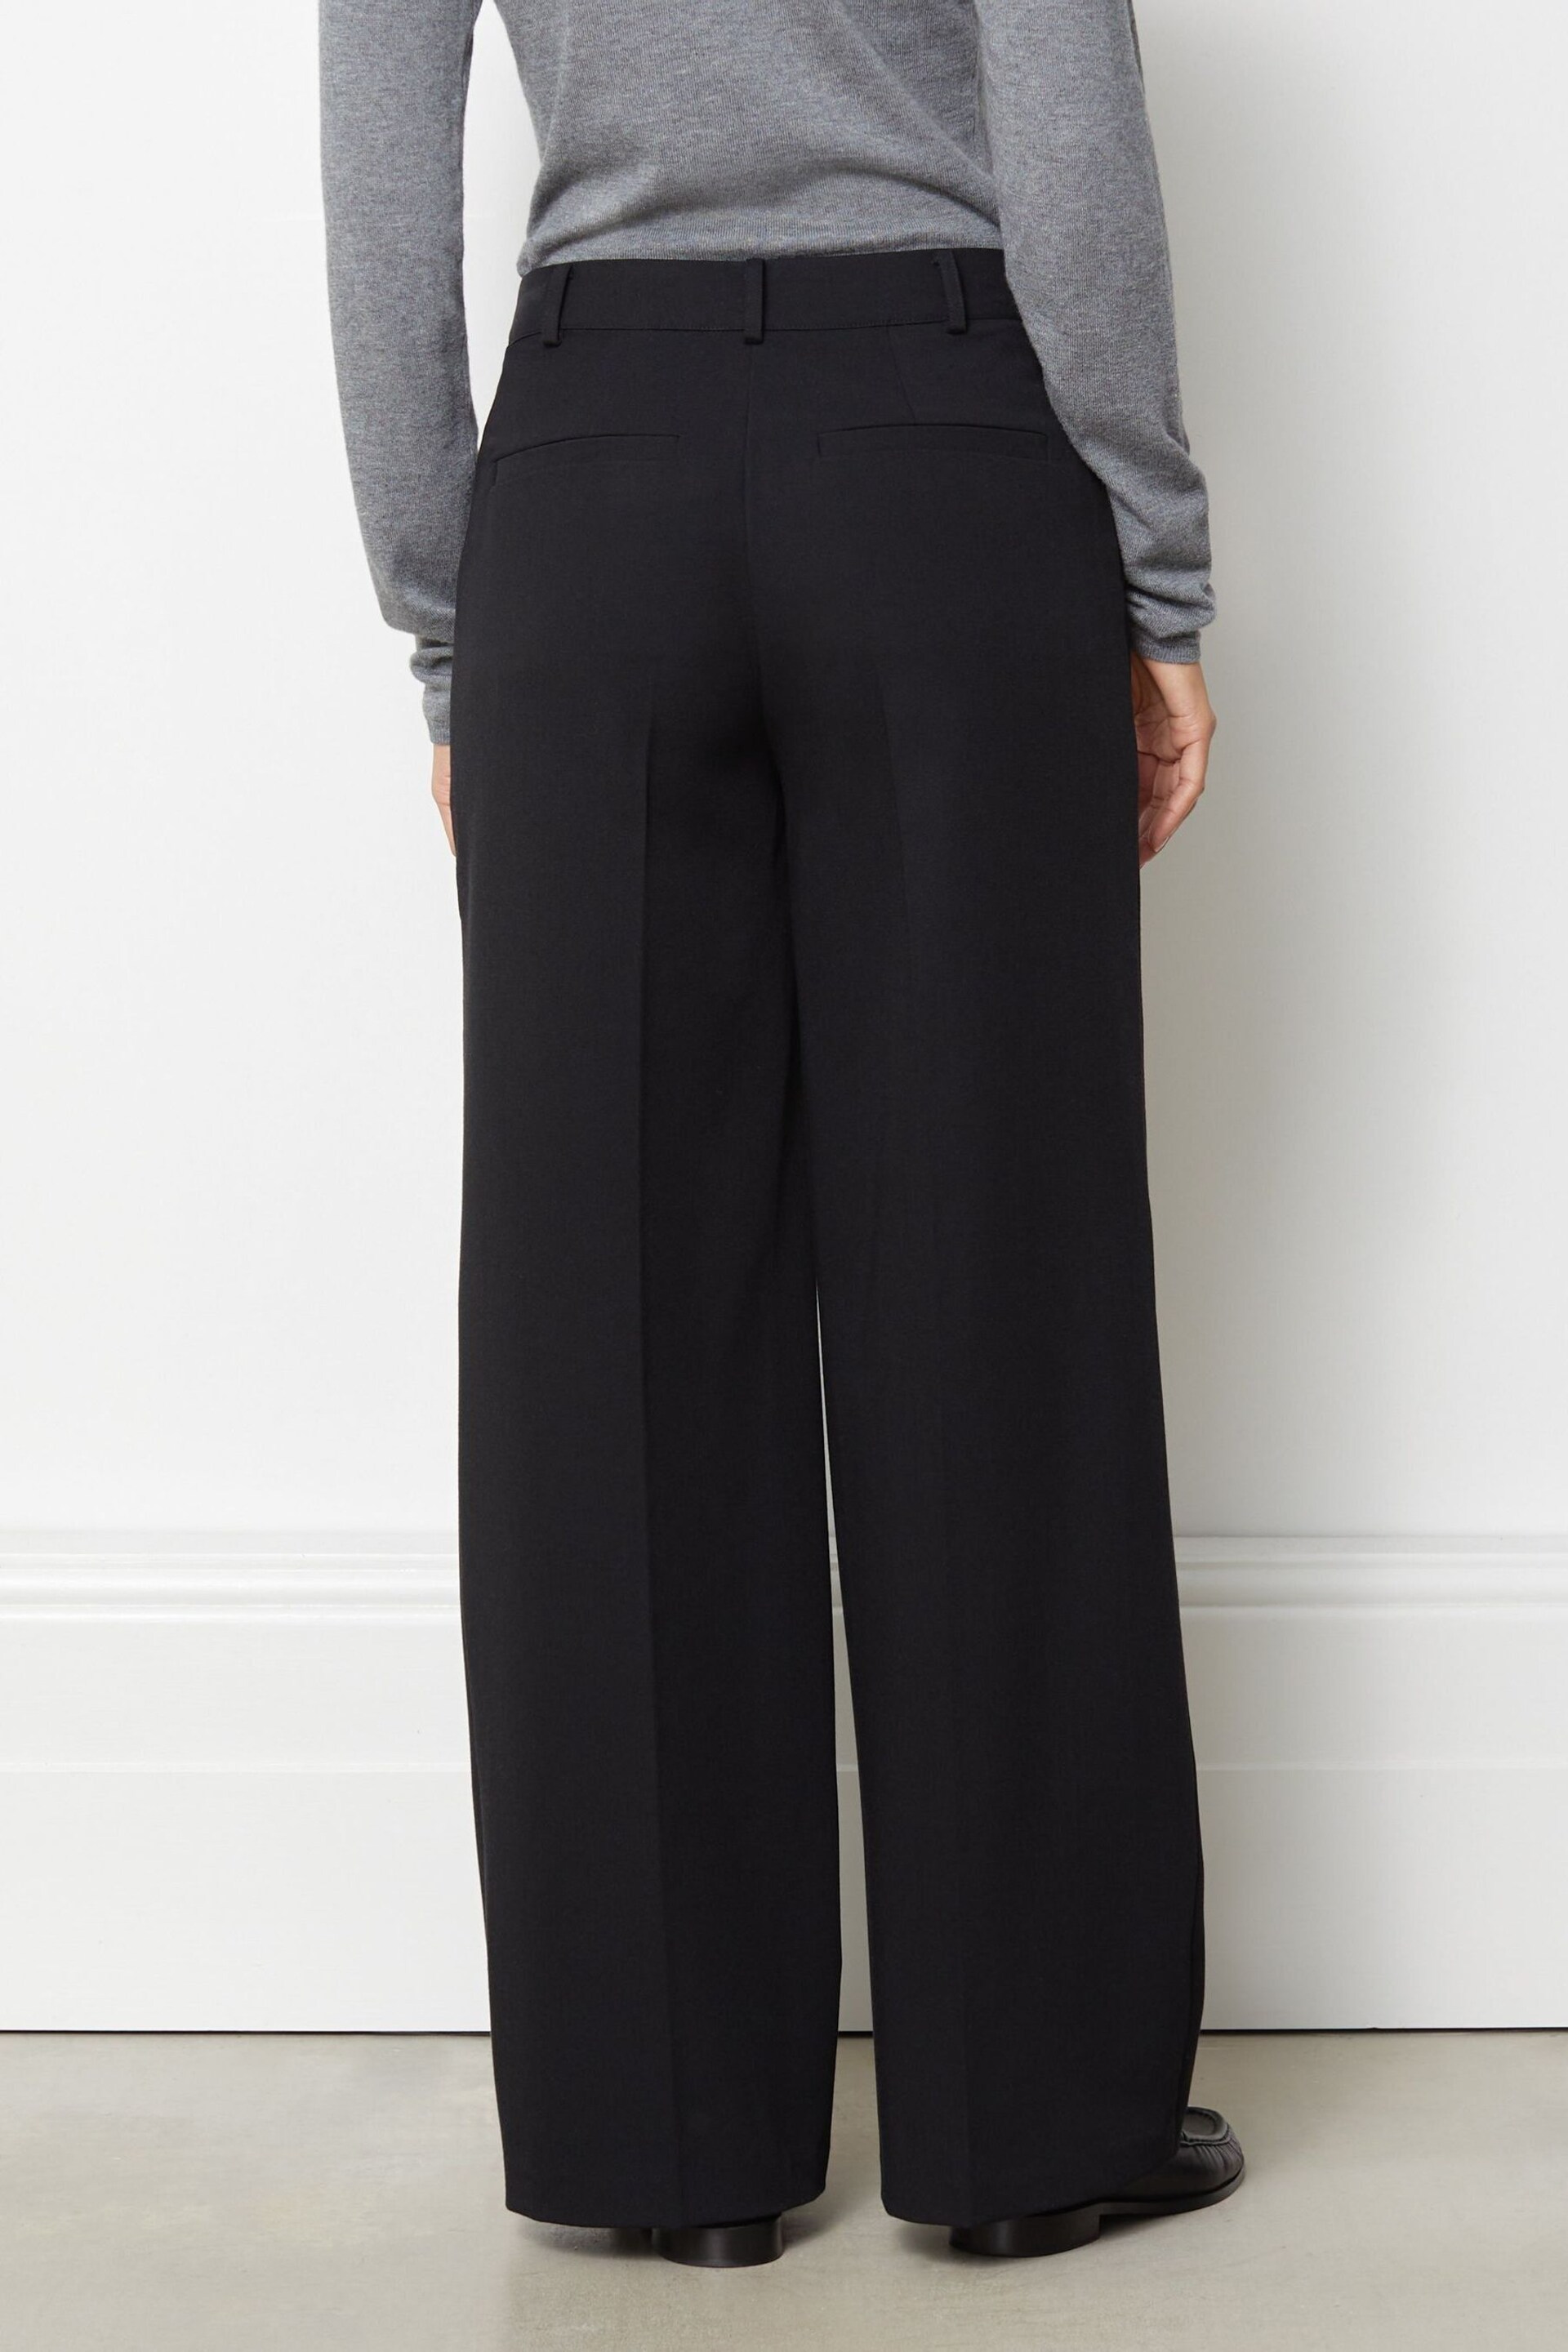 Albaray Wide Leg Black Trousers - Image 2 of 4